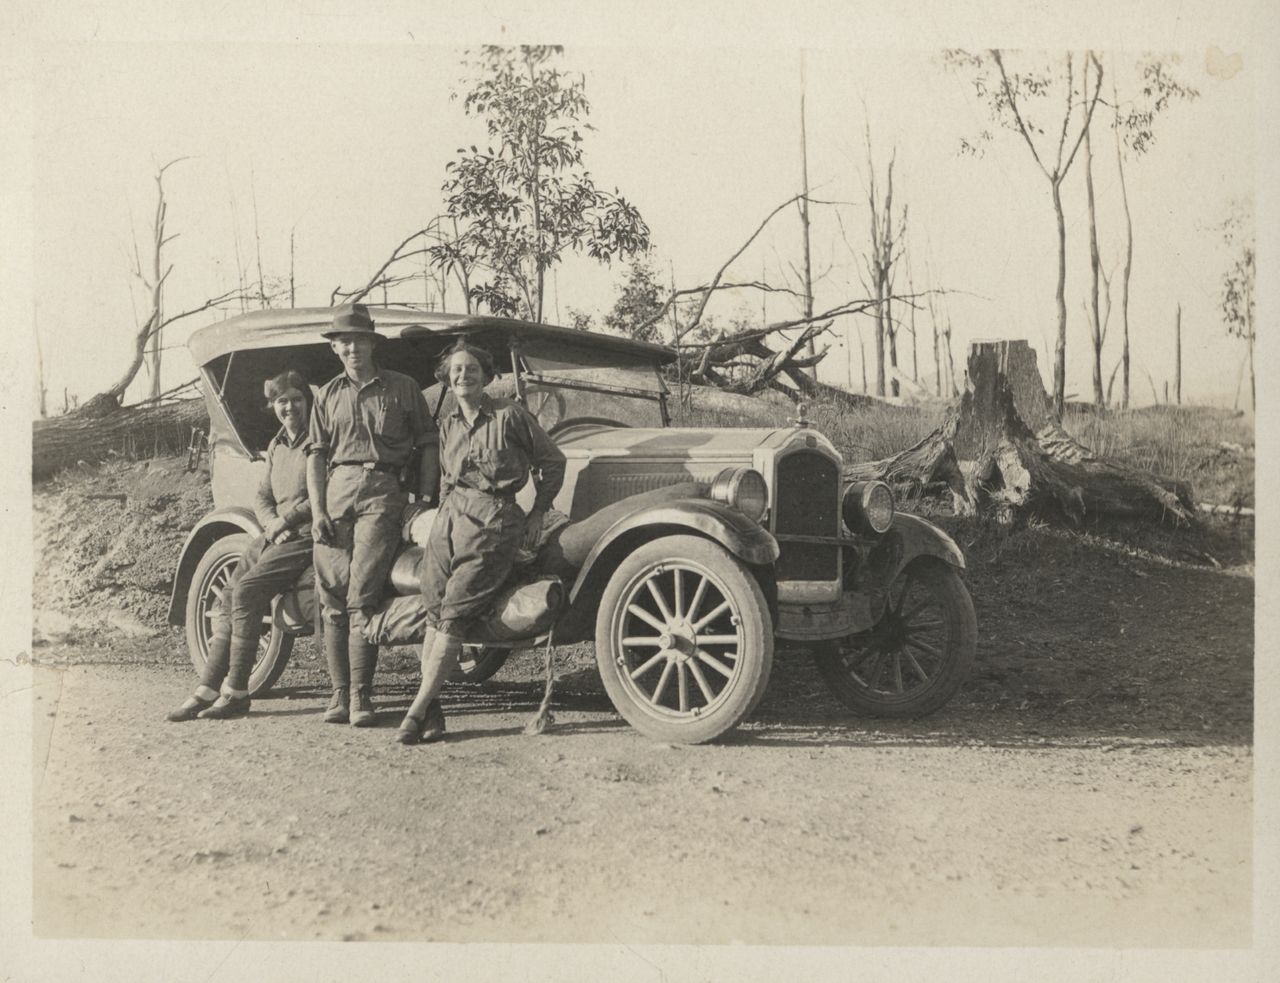 NORA HOLDSWORTH, JAMES LOWSON AND DOROTHY HILL AT A UNIVERSITY OF QUEENSLAND GEOLOGY EXCURSION, C1928 TO 1929